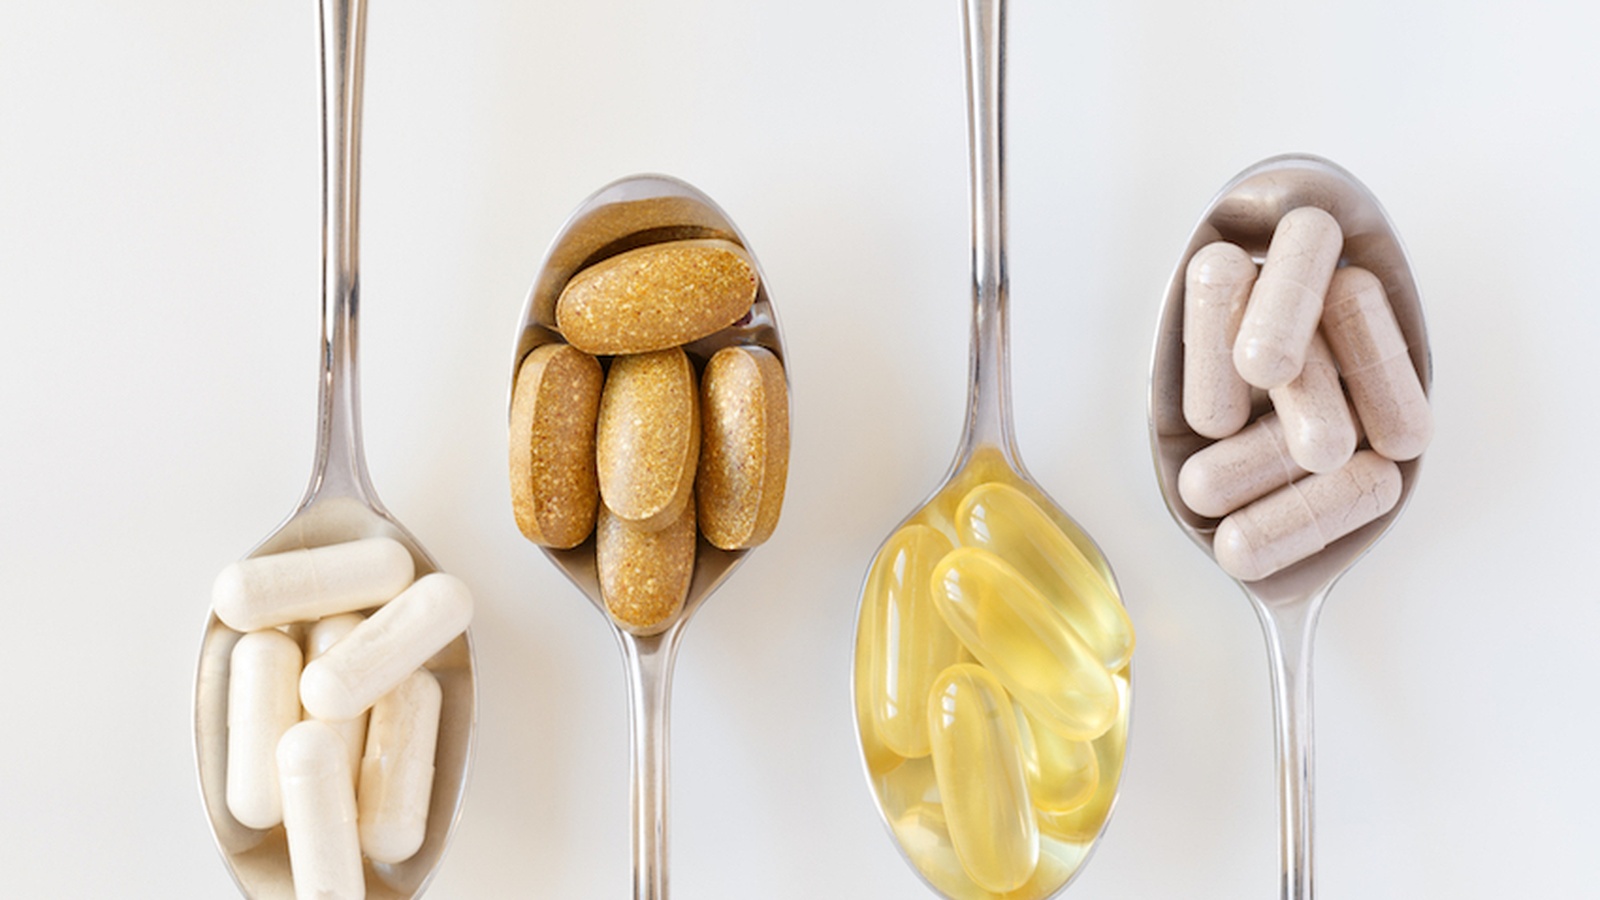 Have You Ever Wondered If Vitamins Are Effective?